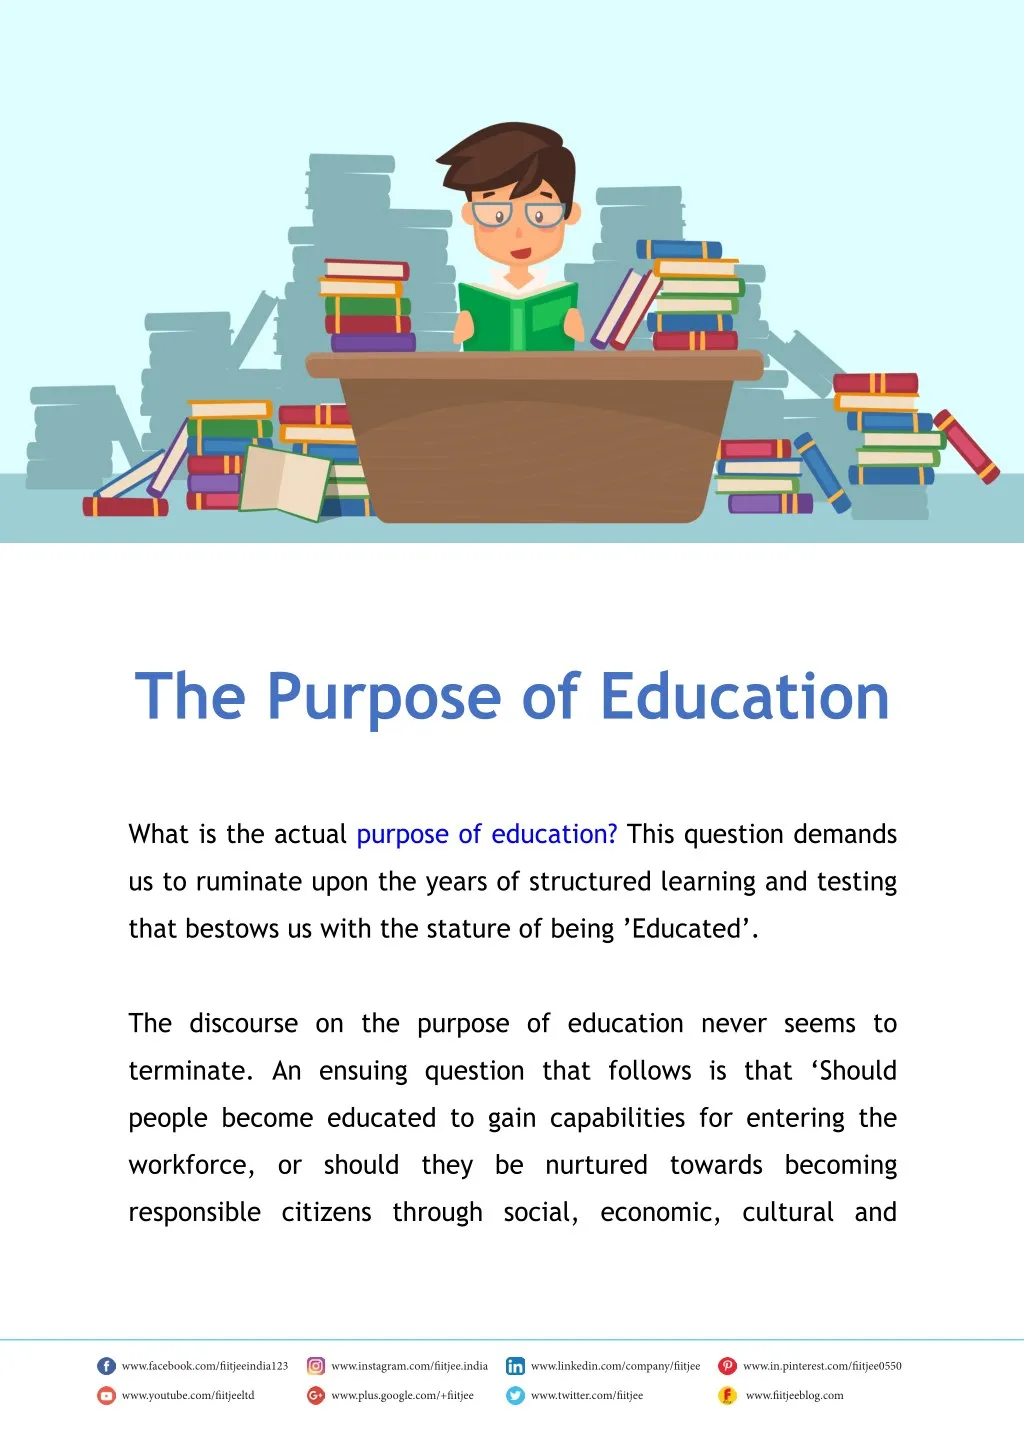 write an article about the purpose of education